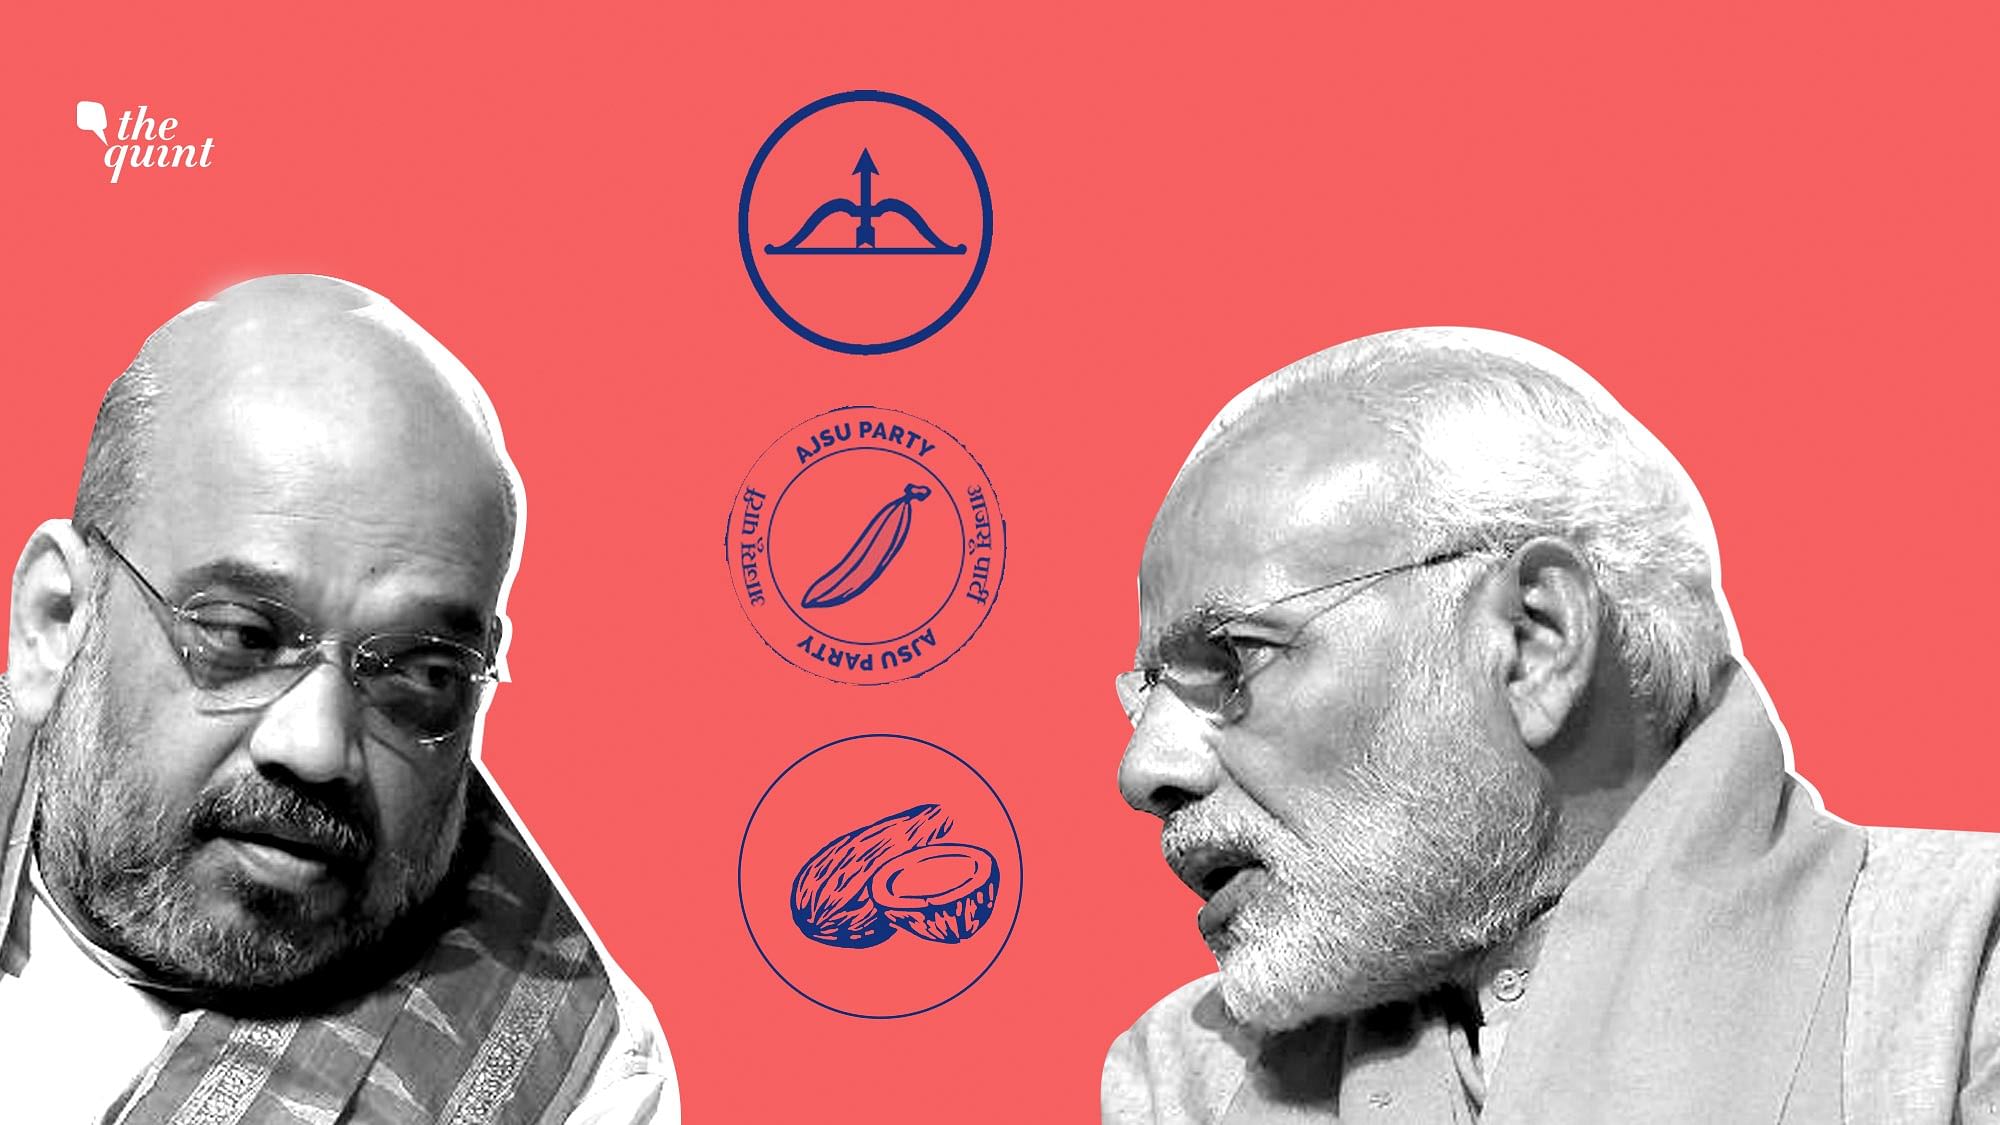 BJP has grown phenomenally under Narendra Modi & Amit Shah. Now its looking to expand at the expense of allies.